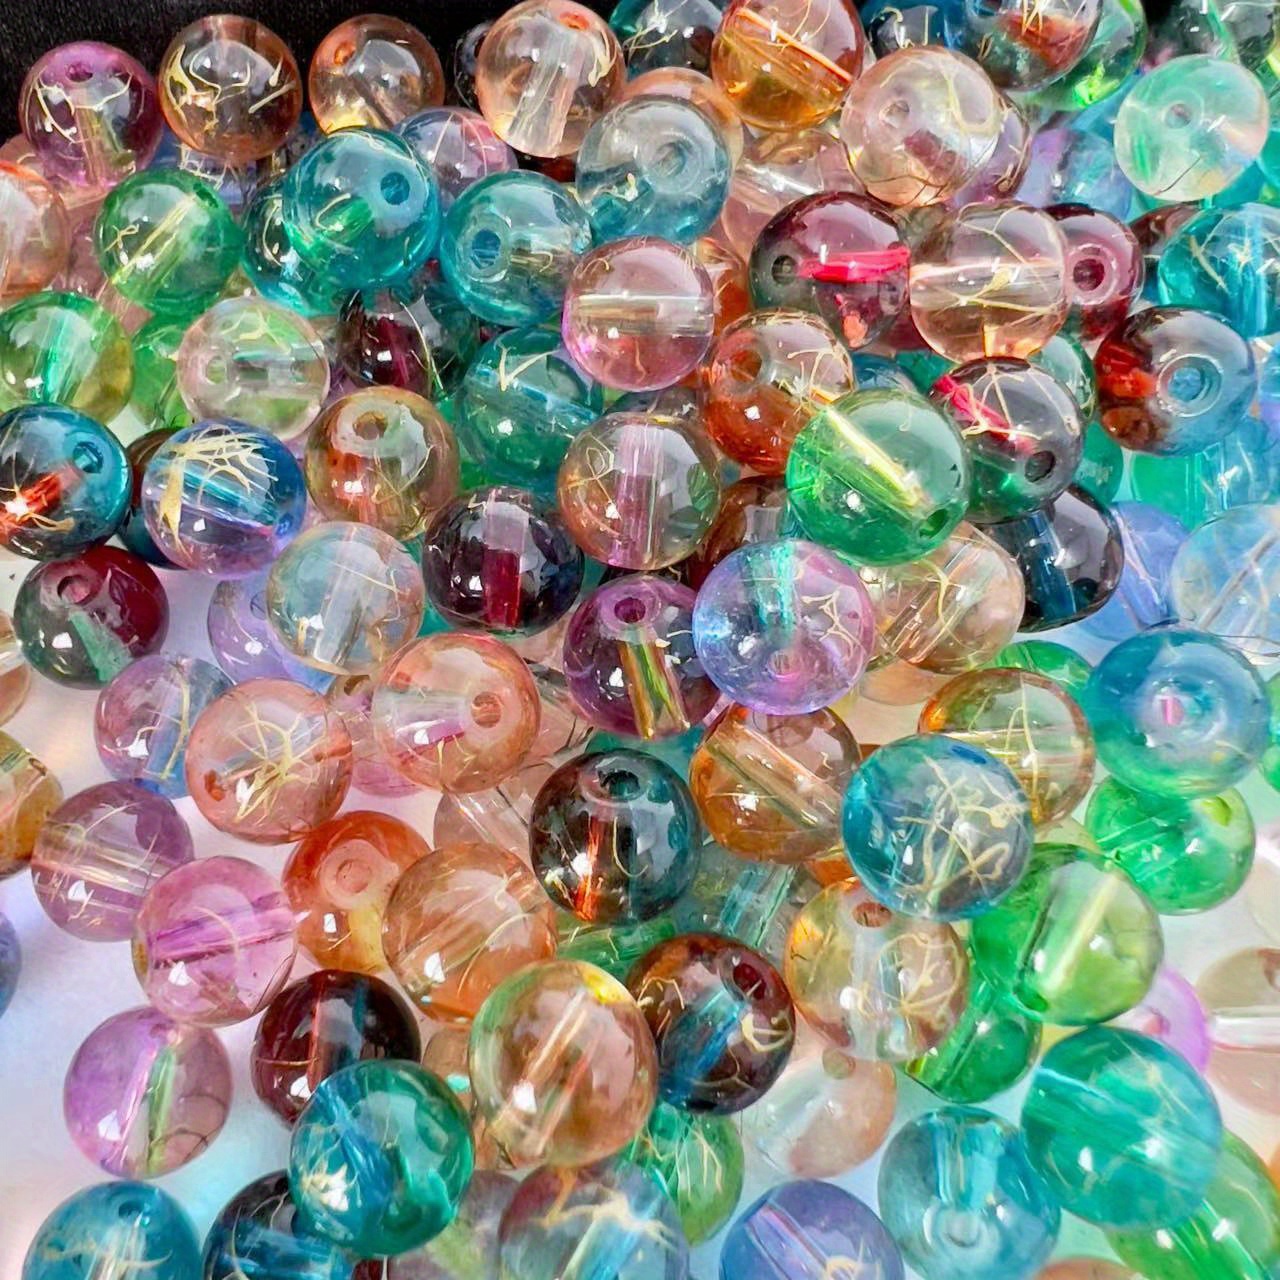  SEWACC 24 Rainbow Glass Beads Letter Beads for